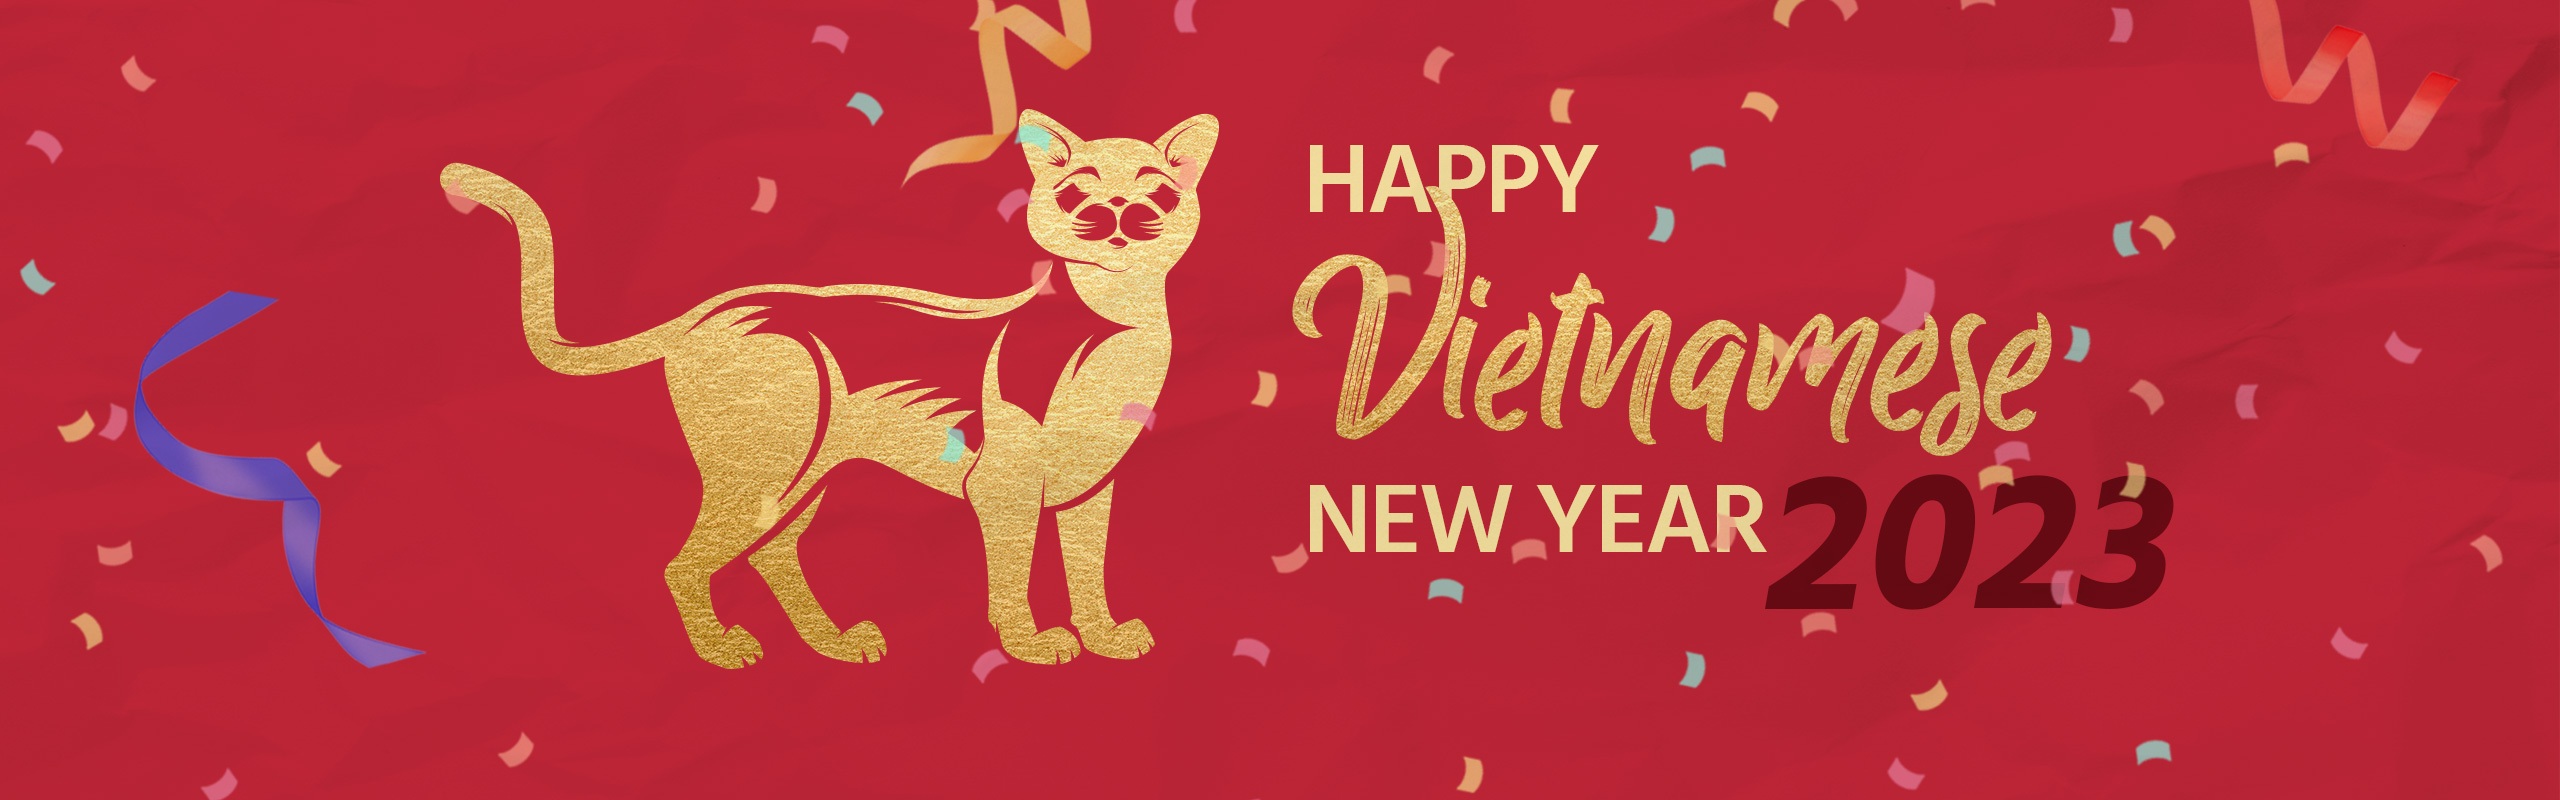 Vietnamese New Year Greetings 2023, Wishes and Images